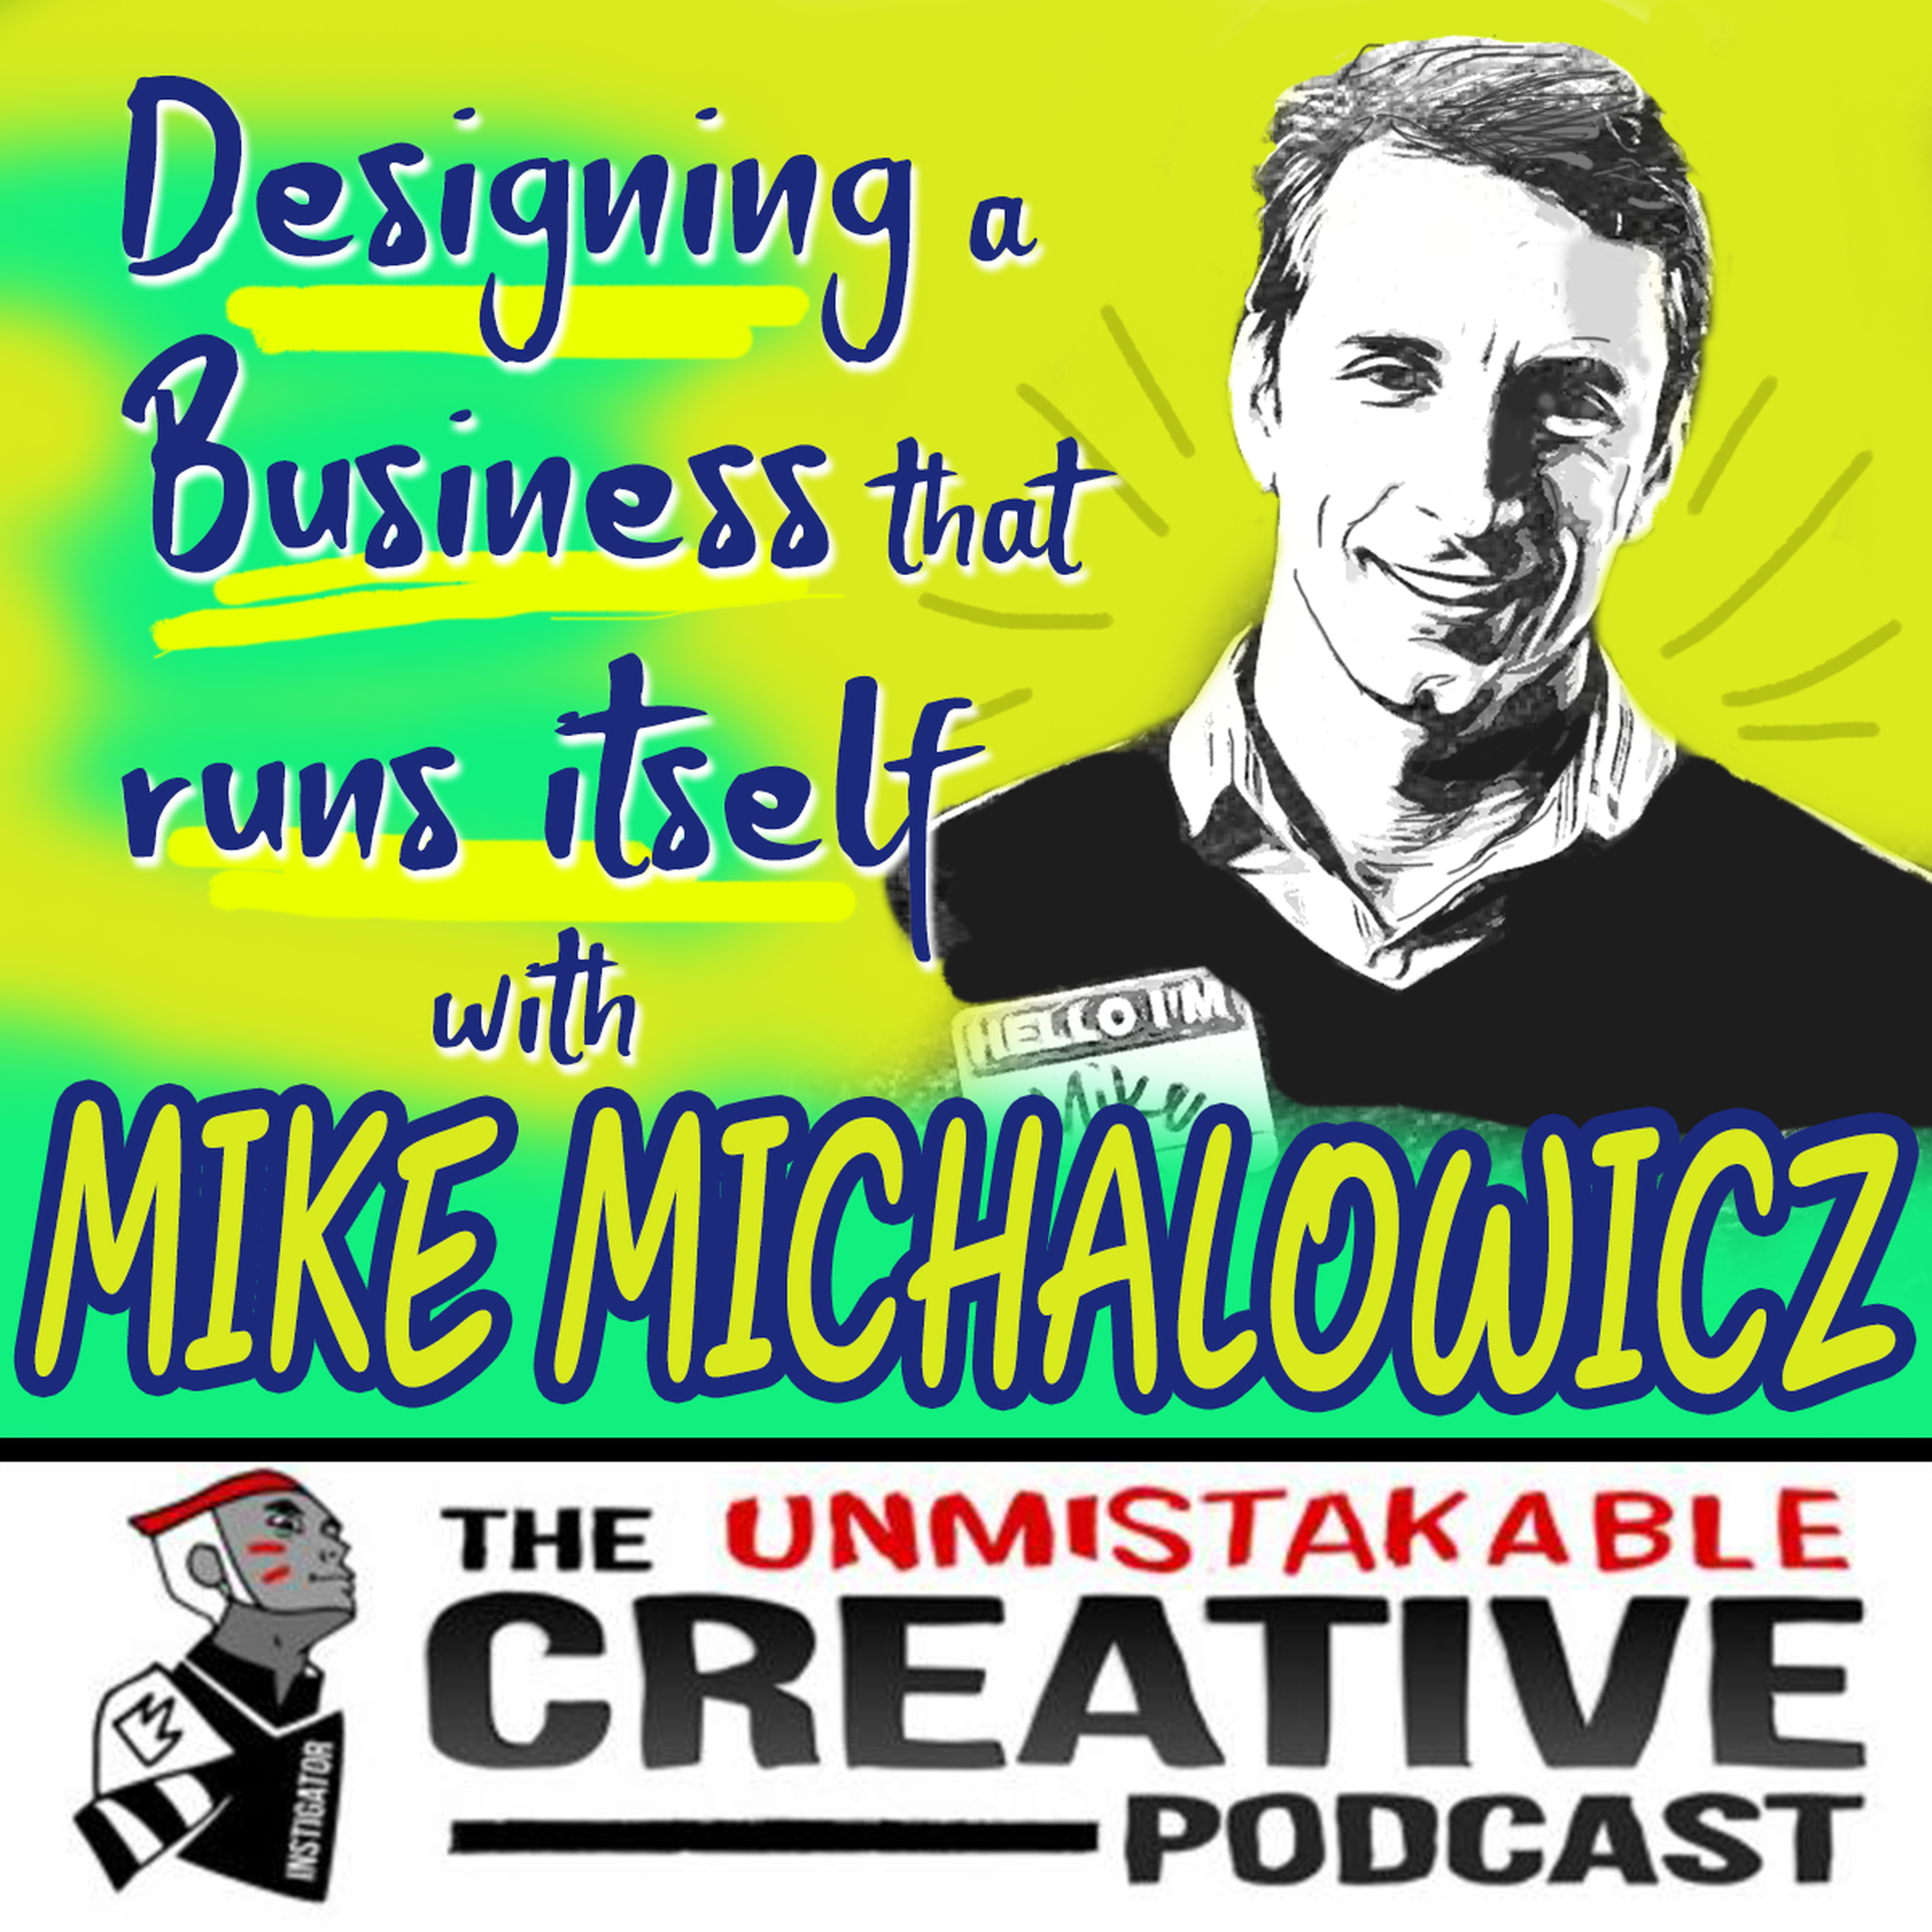 Designing a Business that runs itself with Mike Michalowicz Image